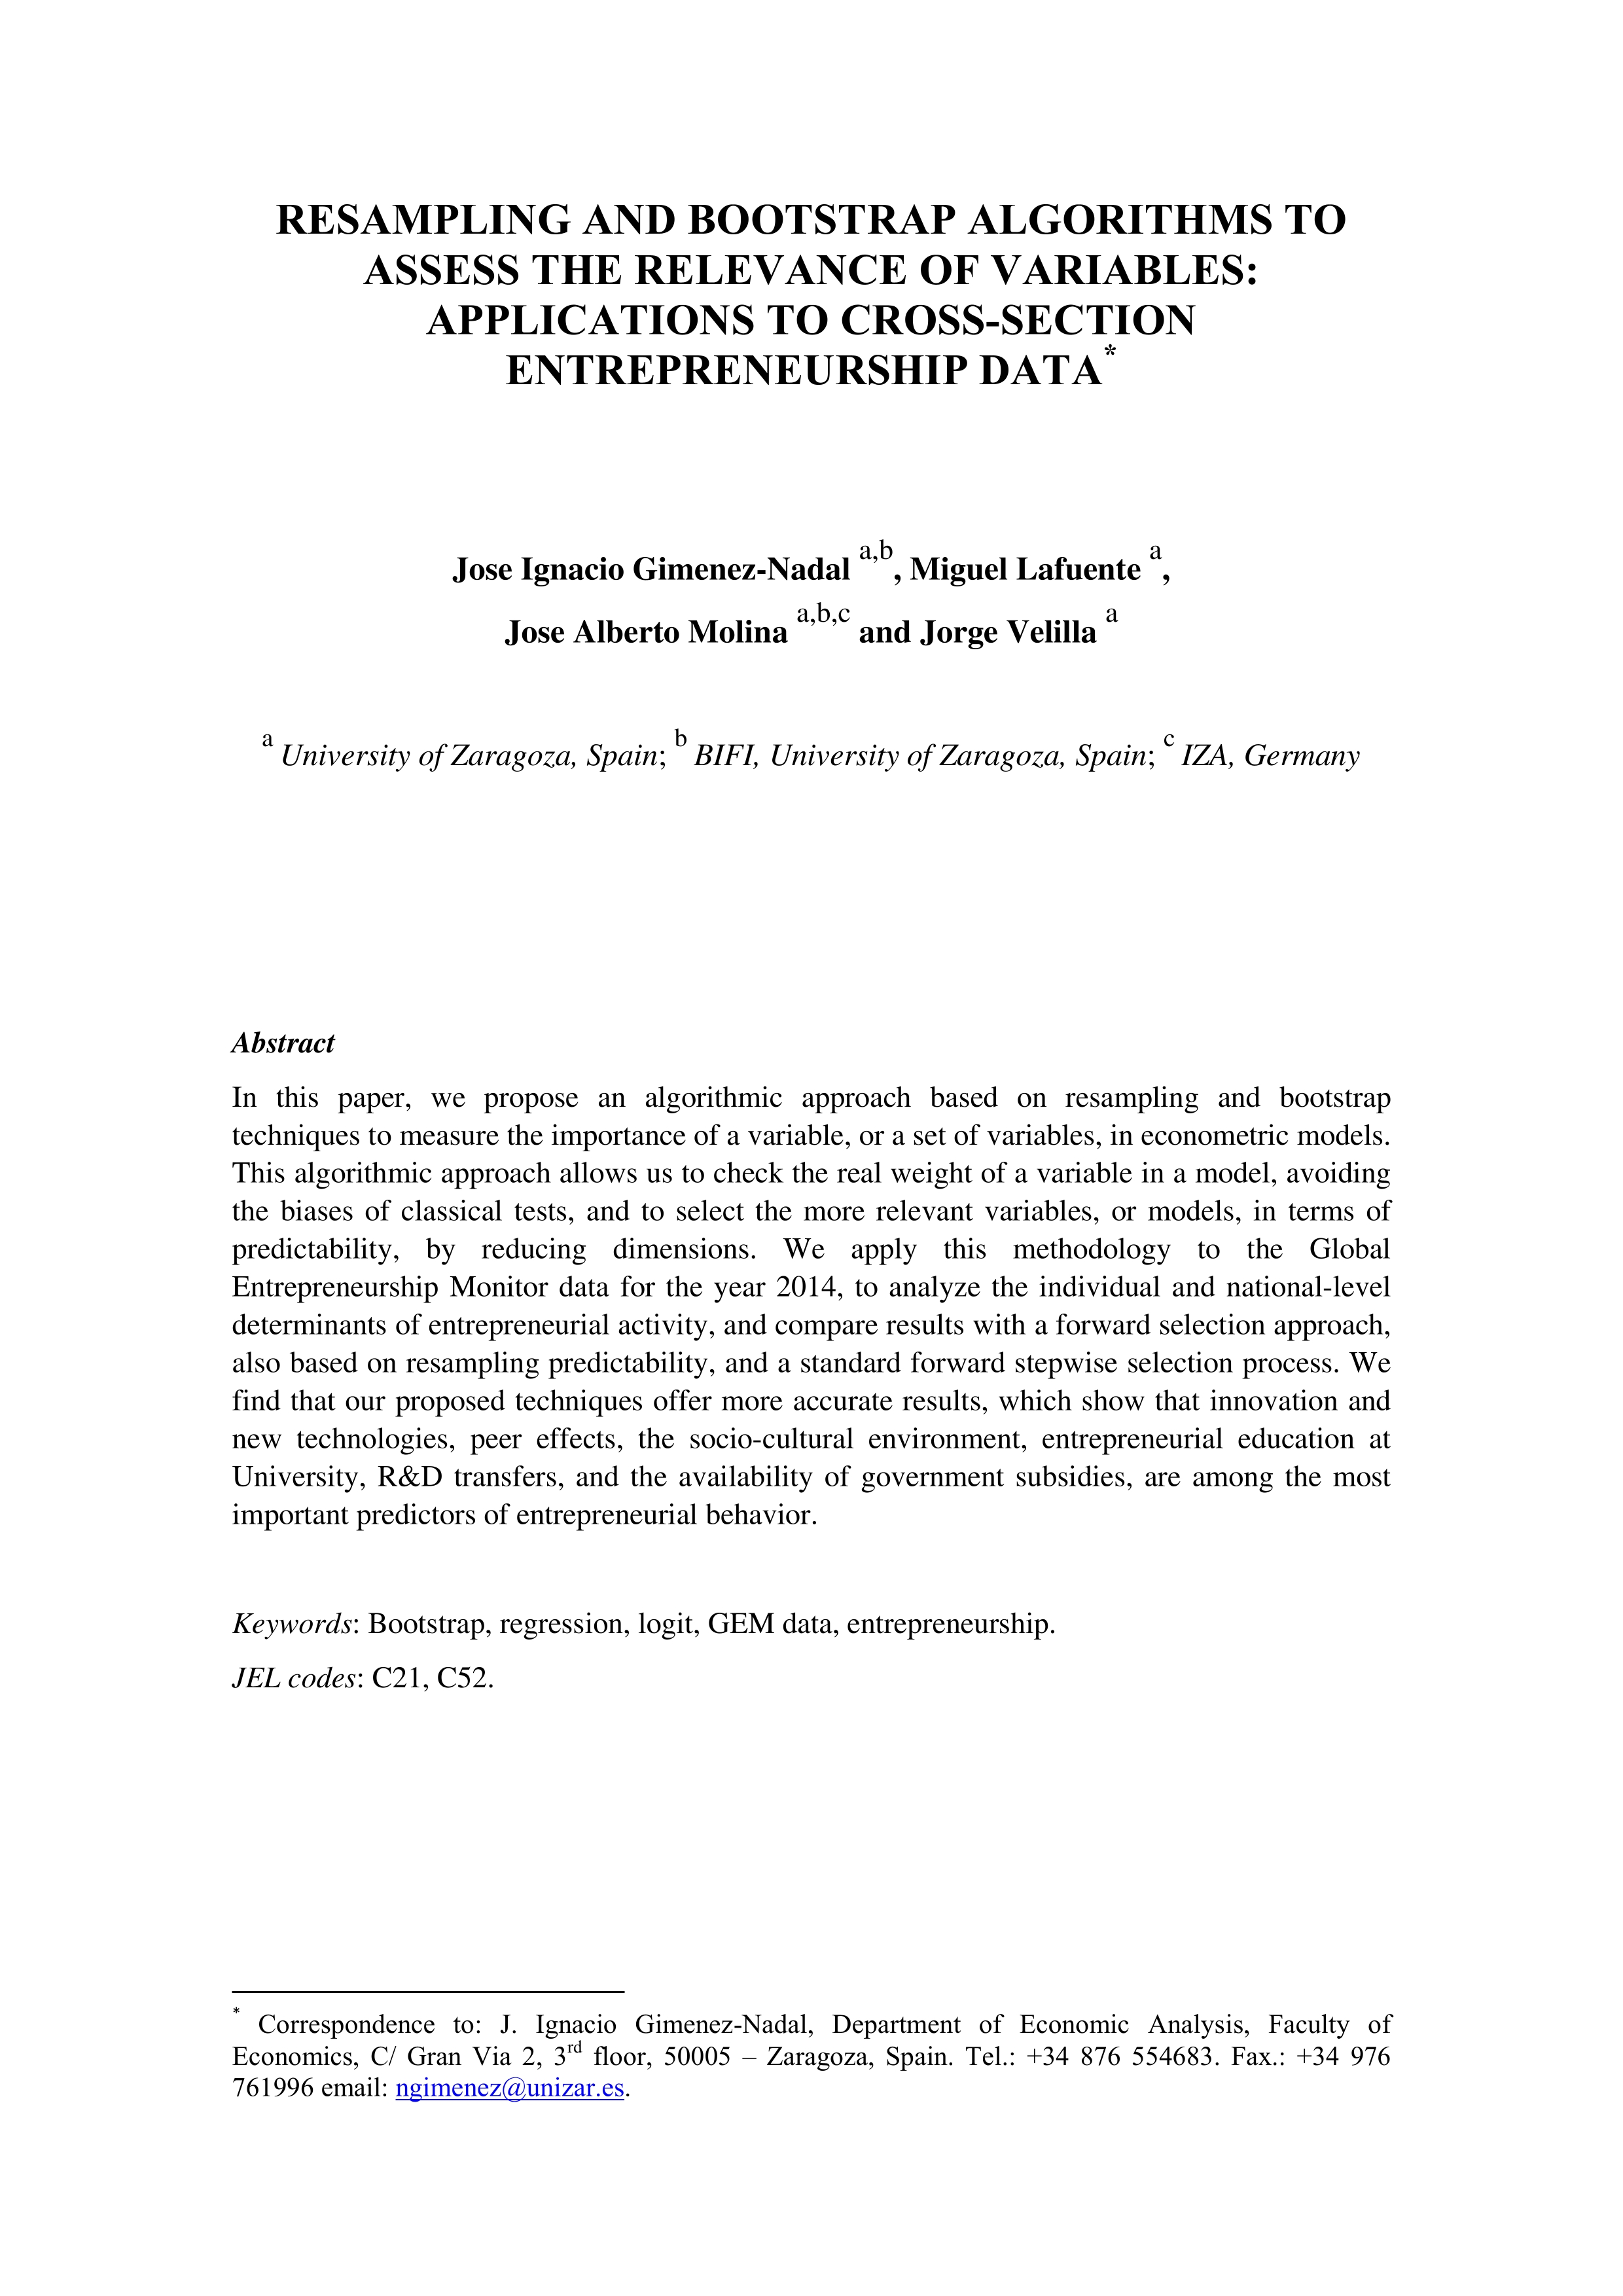 Resampling and bootstrap algorithms to assess the relevance of variables: applications to cross-section entrepreneurship data